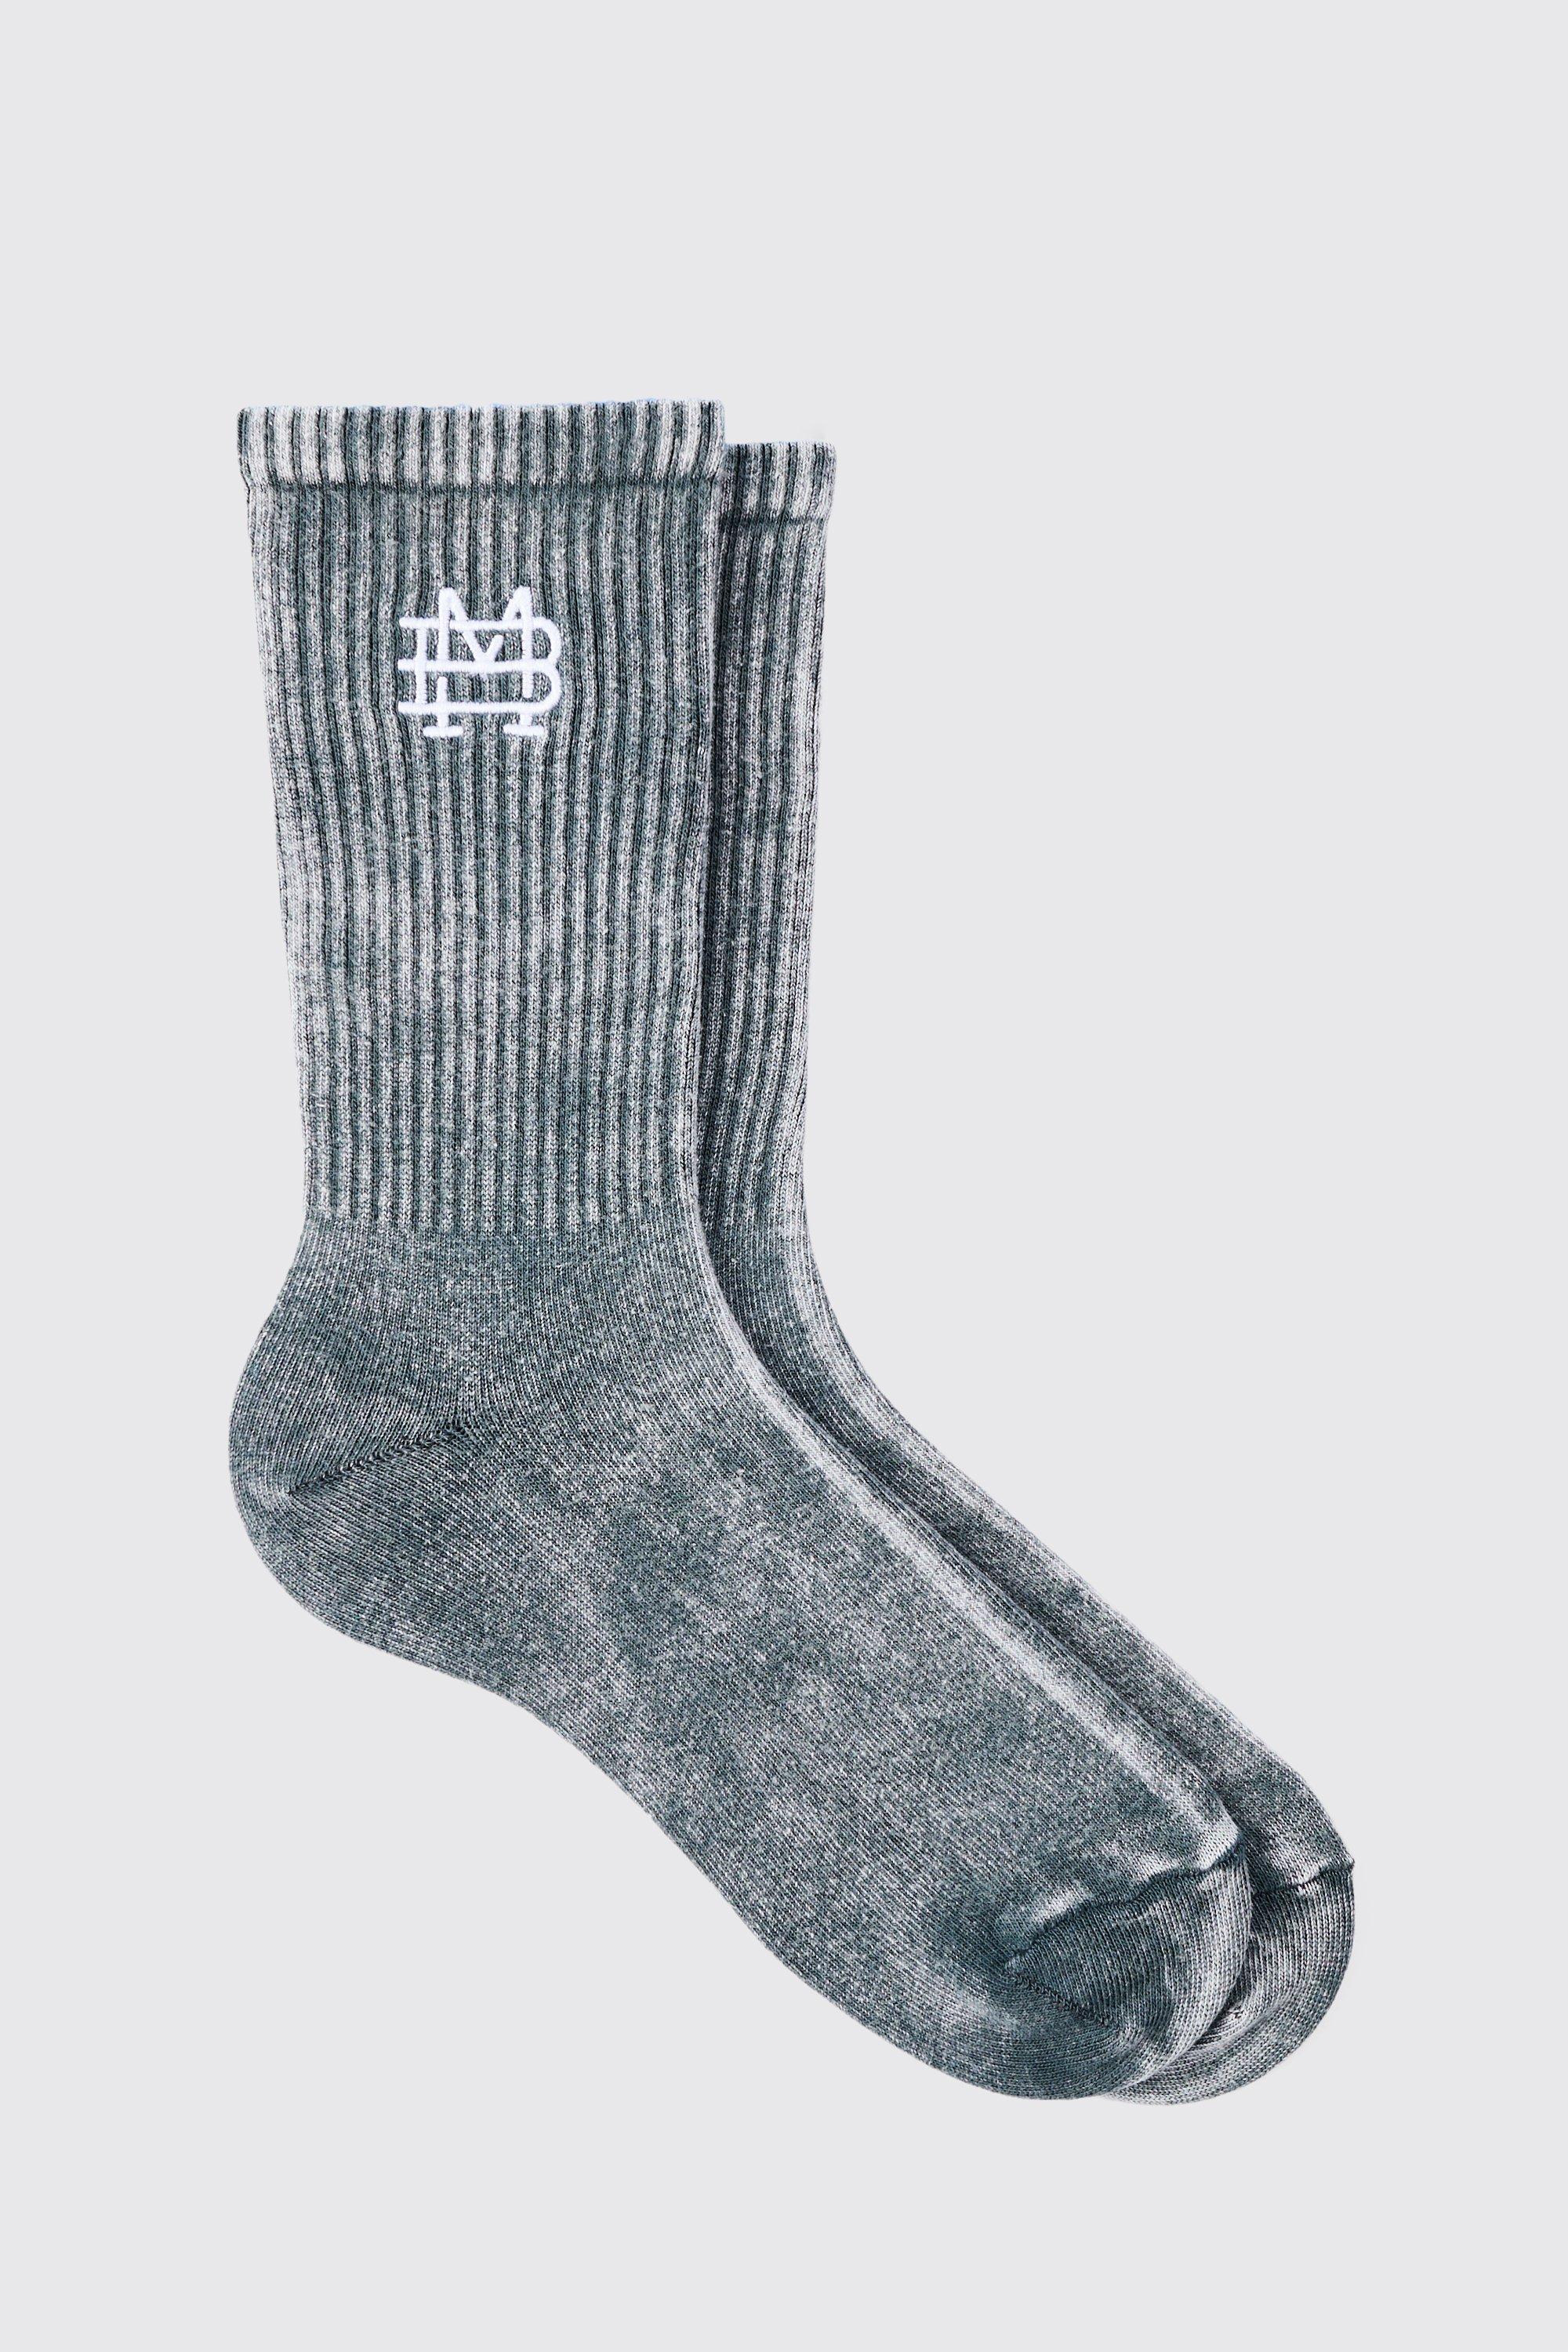 Image of Acid Wash Bm Embroidered Socks In Charcoal, Grigio